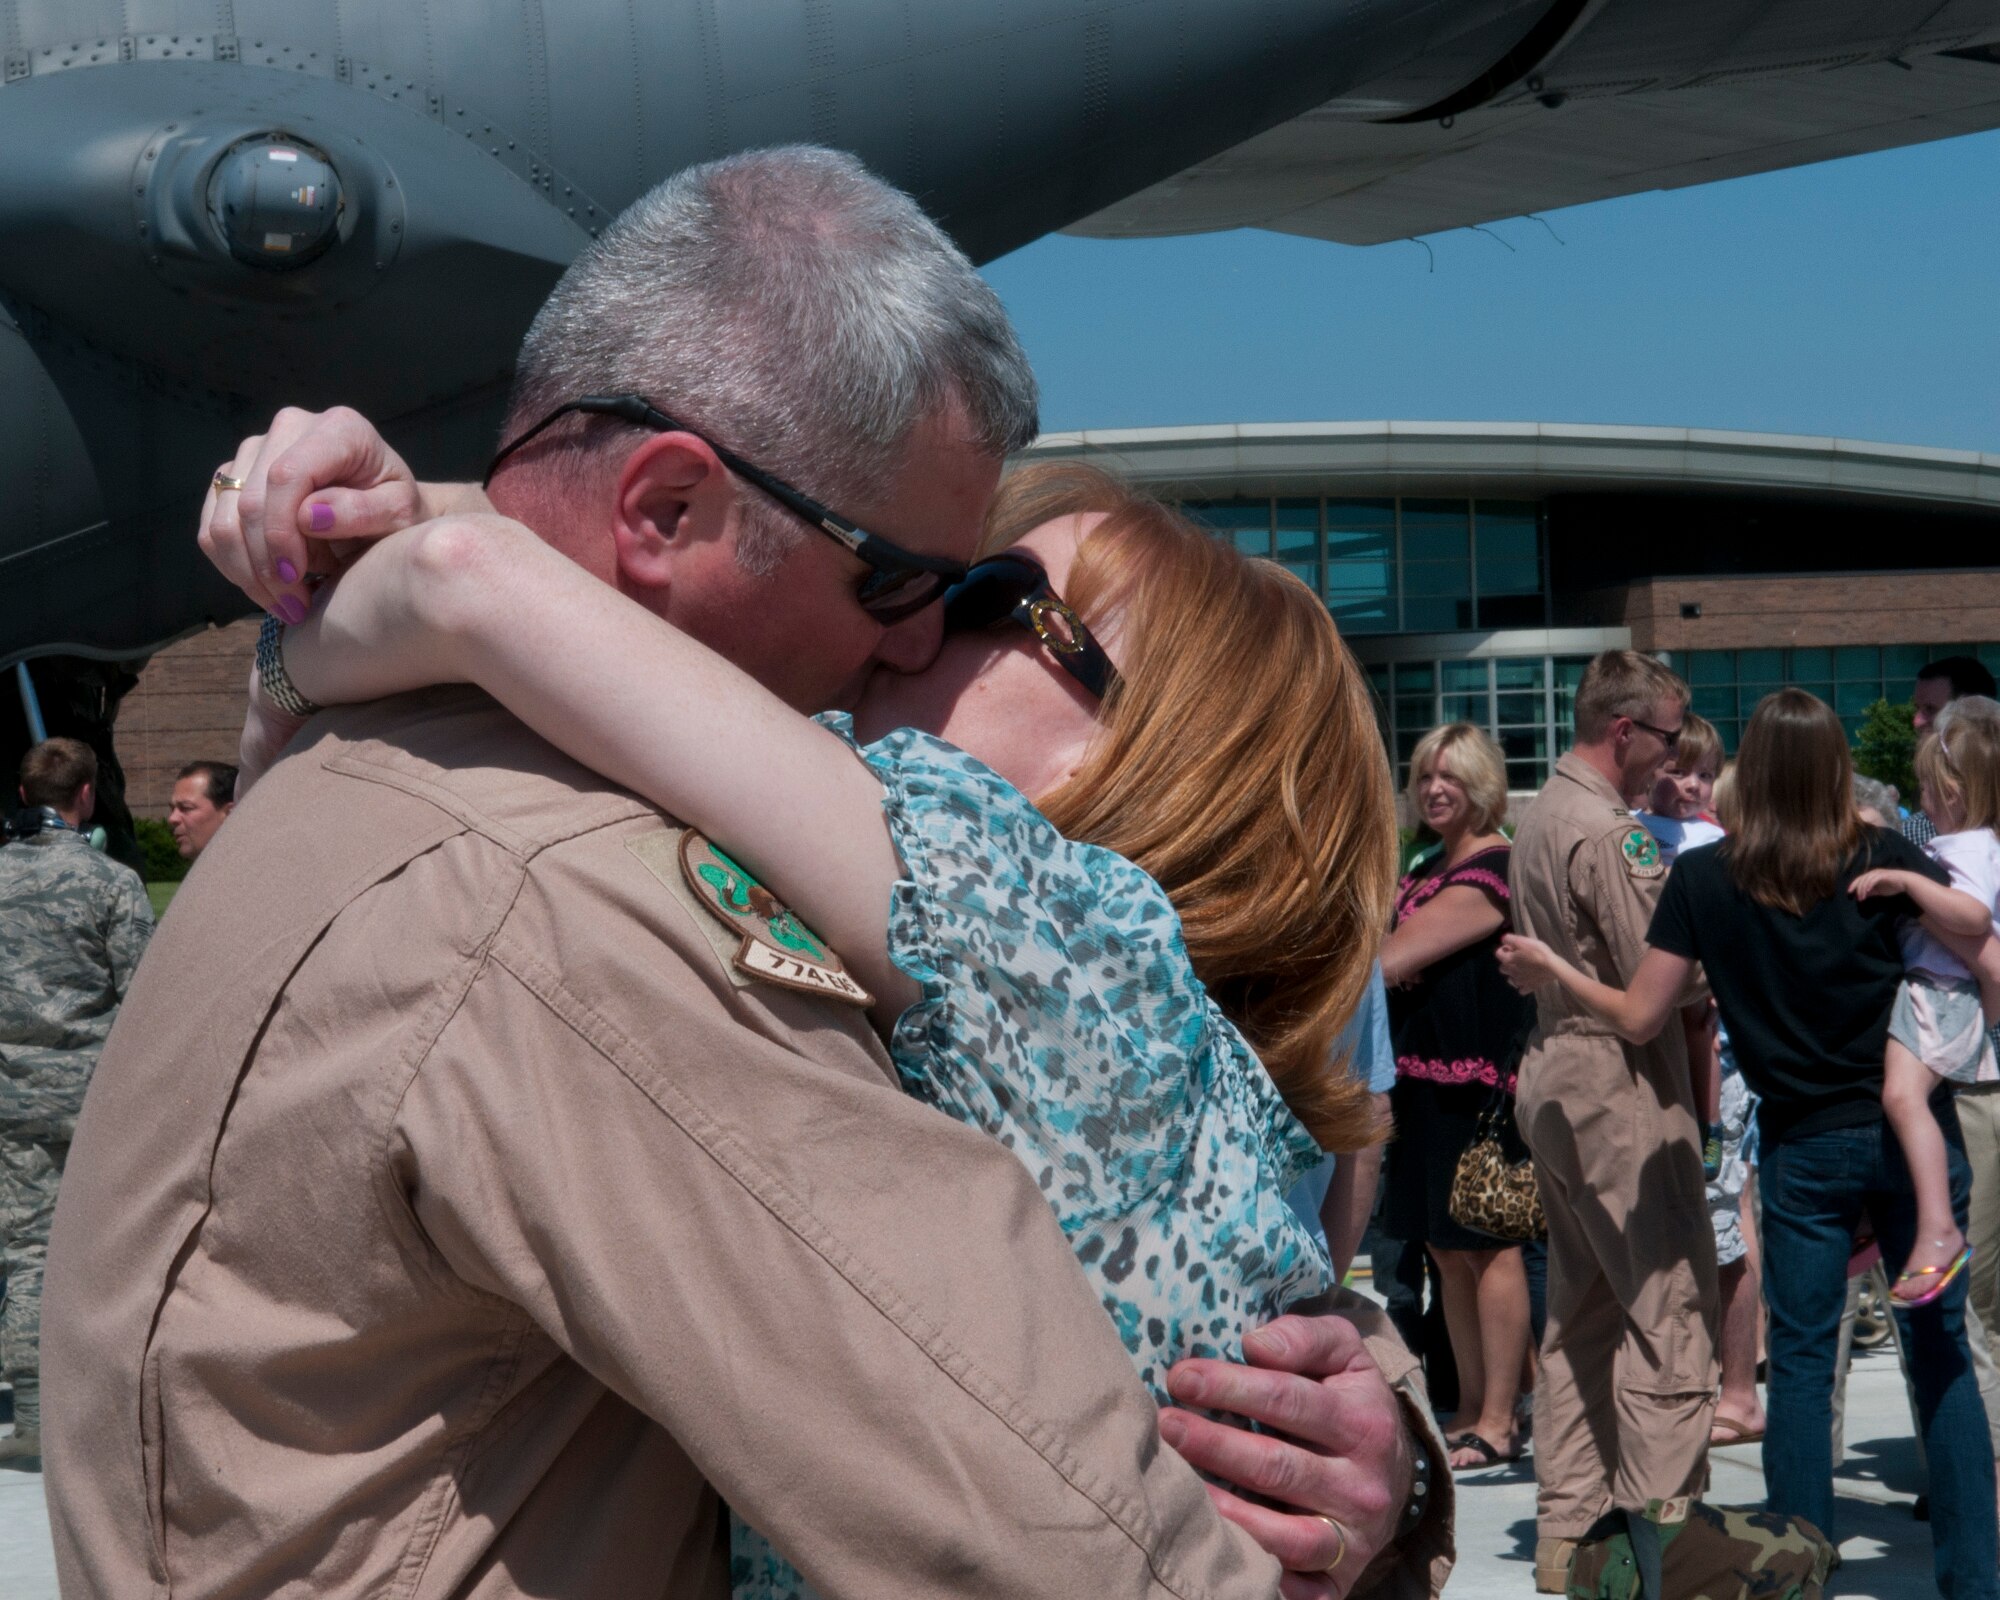 Family and friends greet 133rd Airlift Wing Airmen at the Minneapolis- St. Paul International Airport on May 16, 2012 as they return from a deployment to Southwest Asia. USAF official photo by Senior Master Sgt. Mark Moss